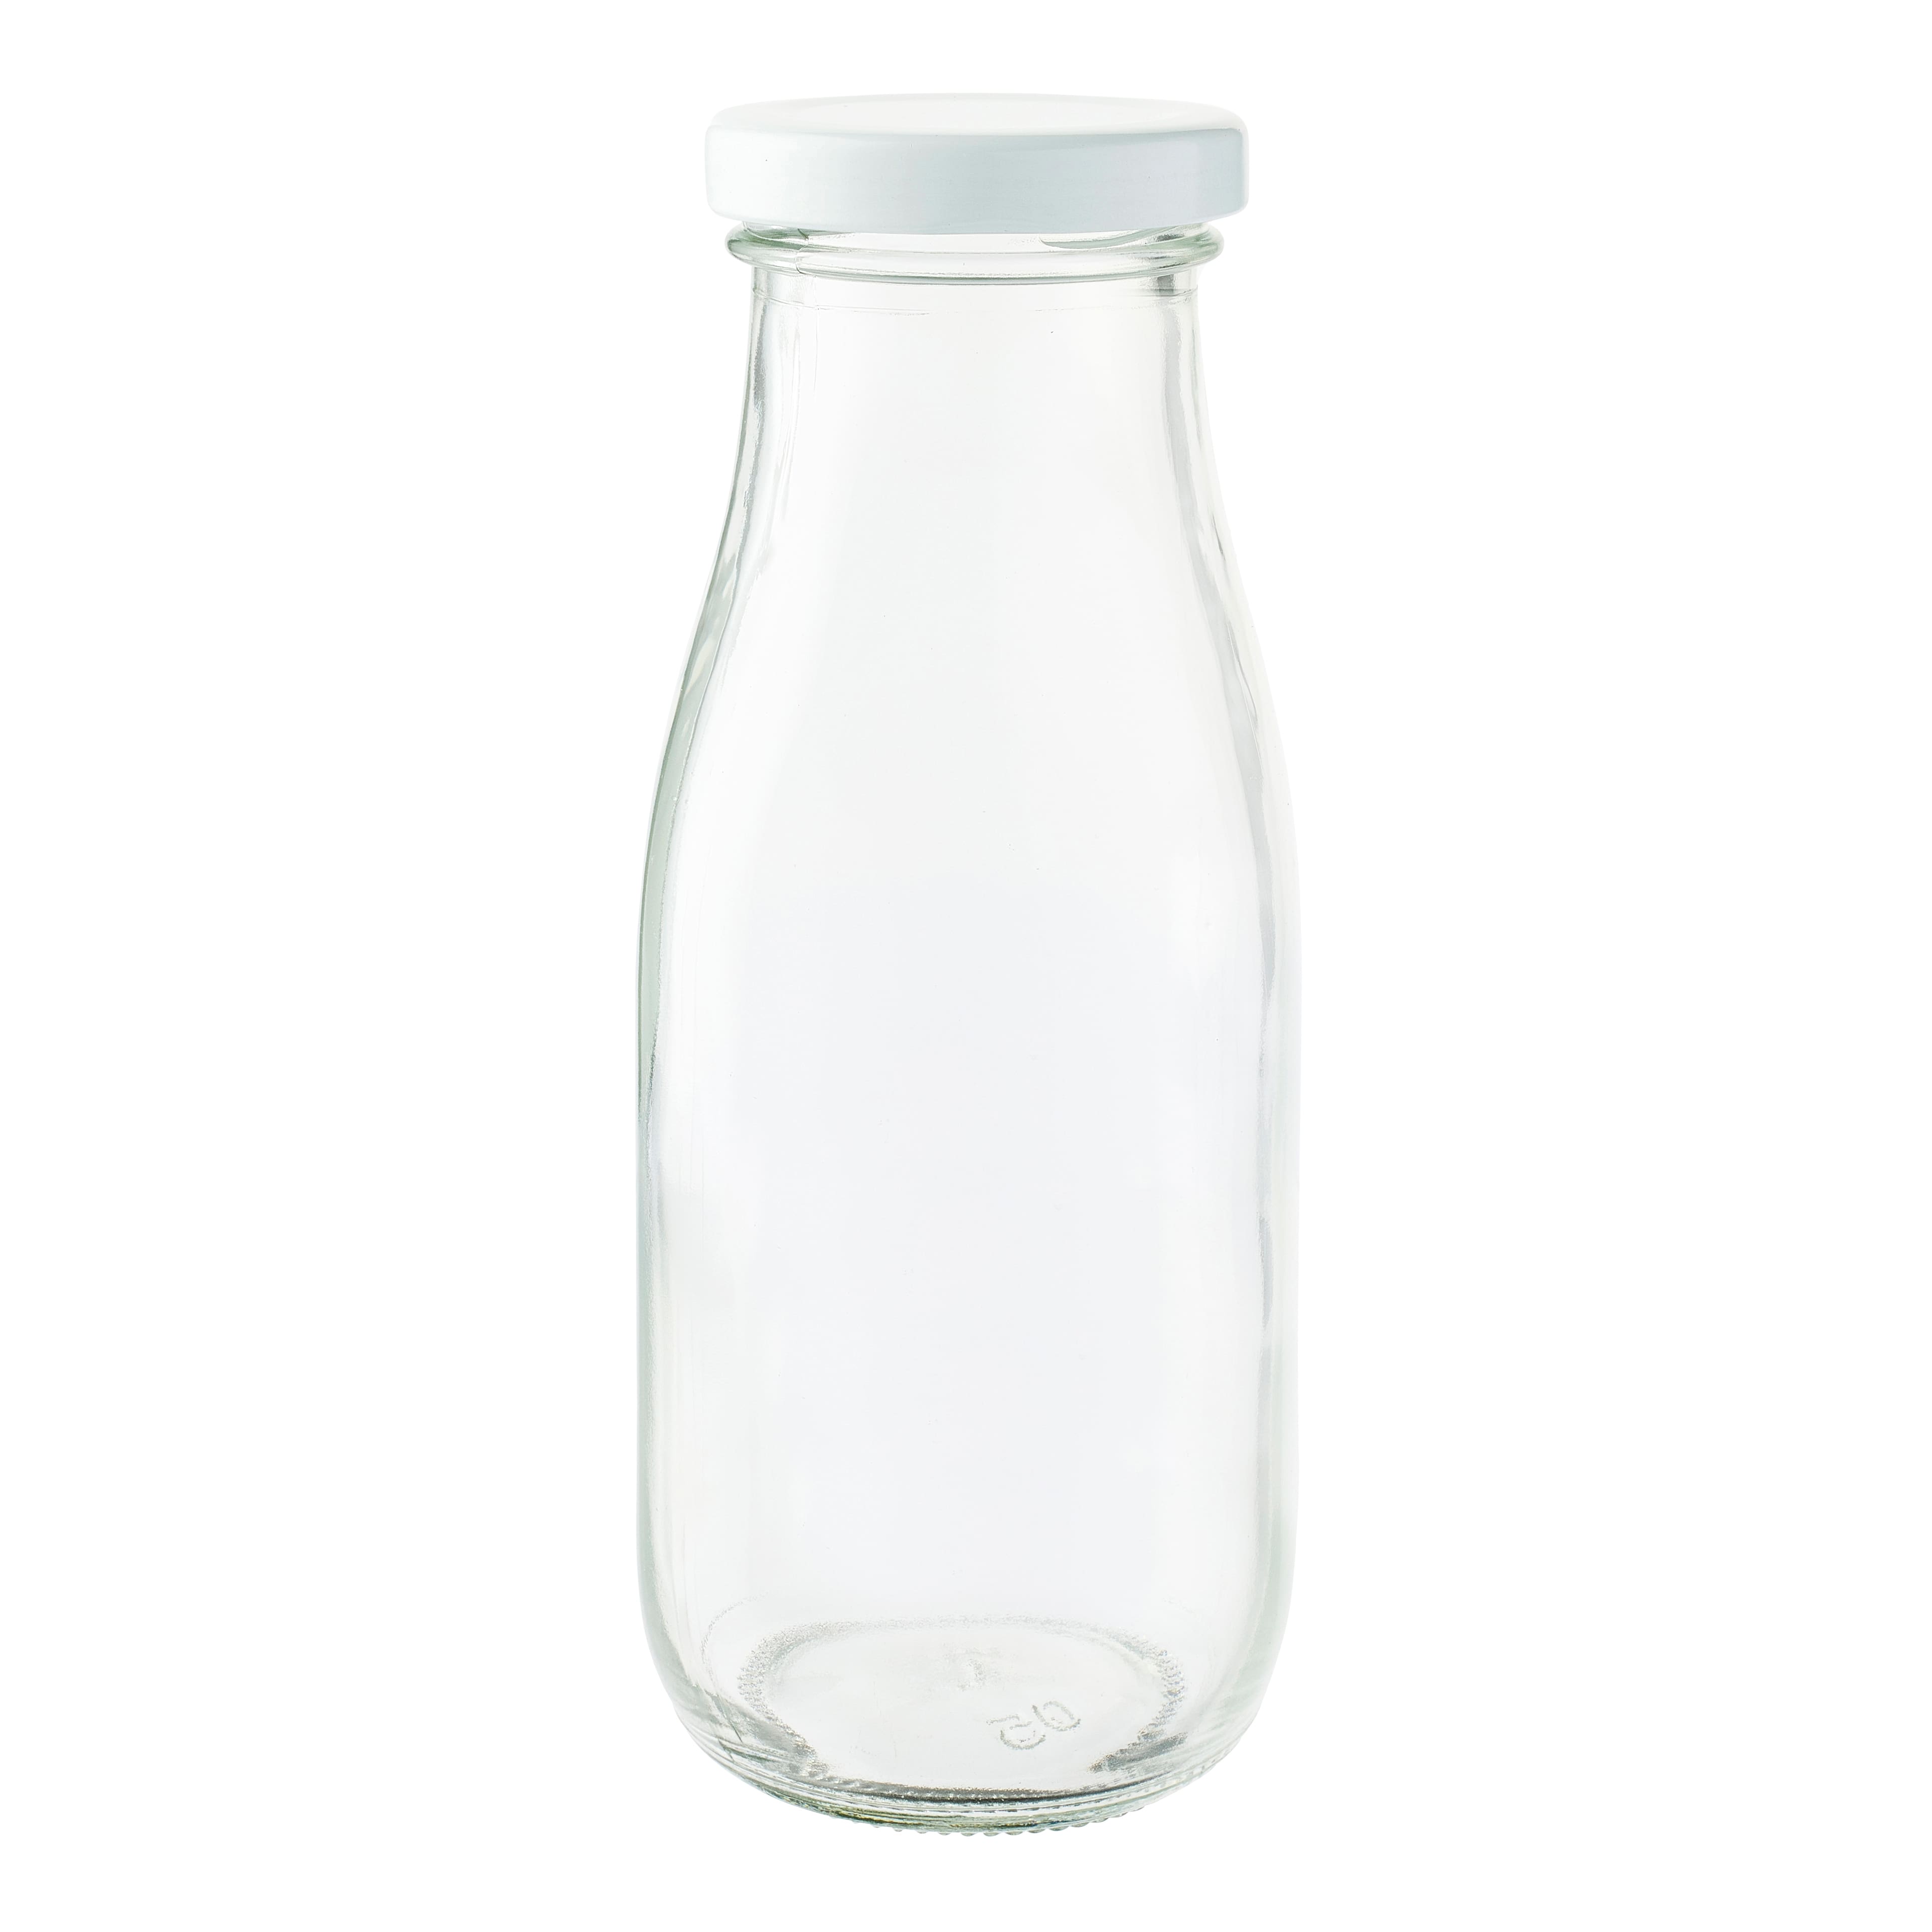 12 Packs: 6 Ct. (72 total) 8oz. Glass Milk Bottles with Lids by Ashland, Clear